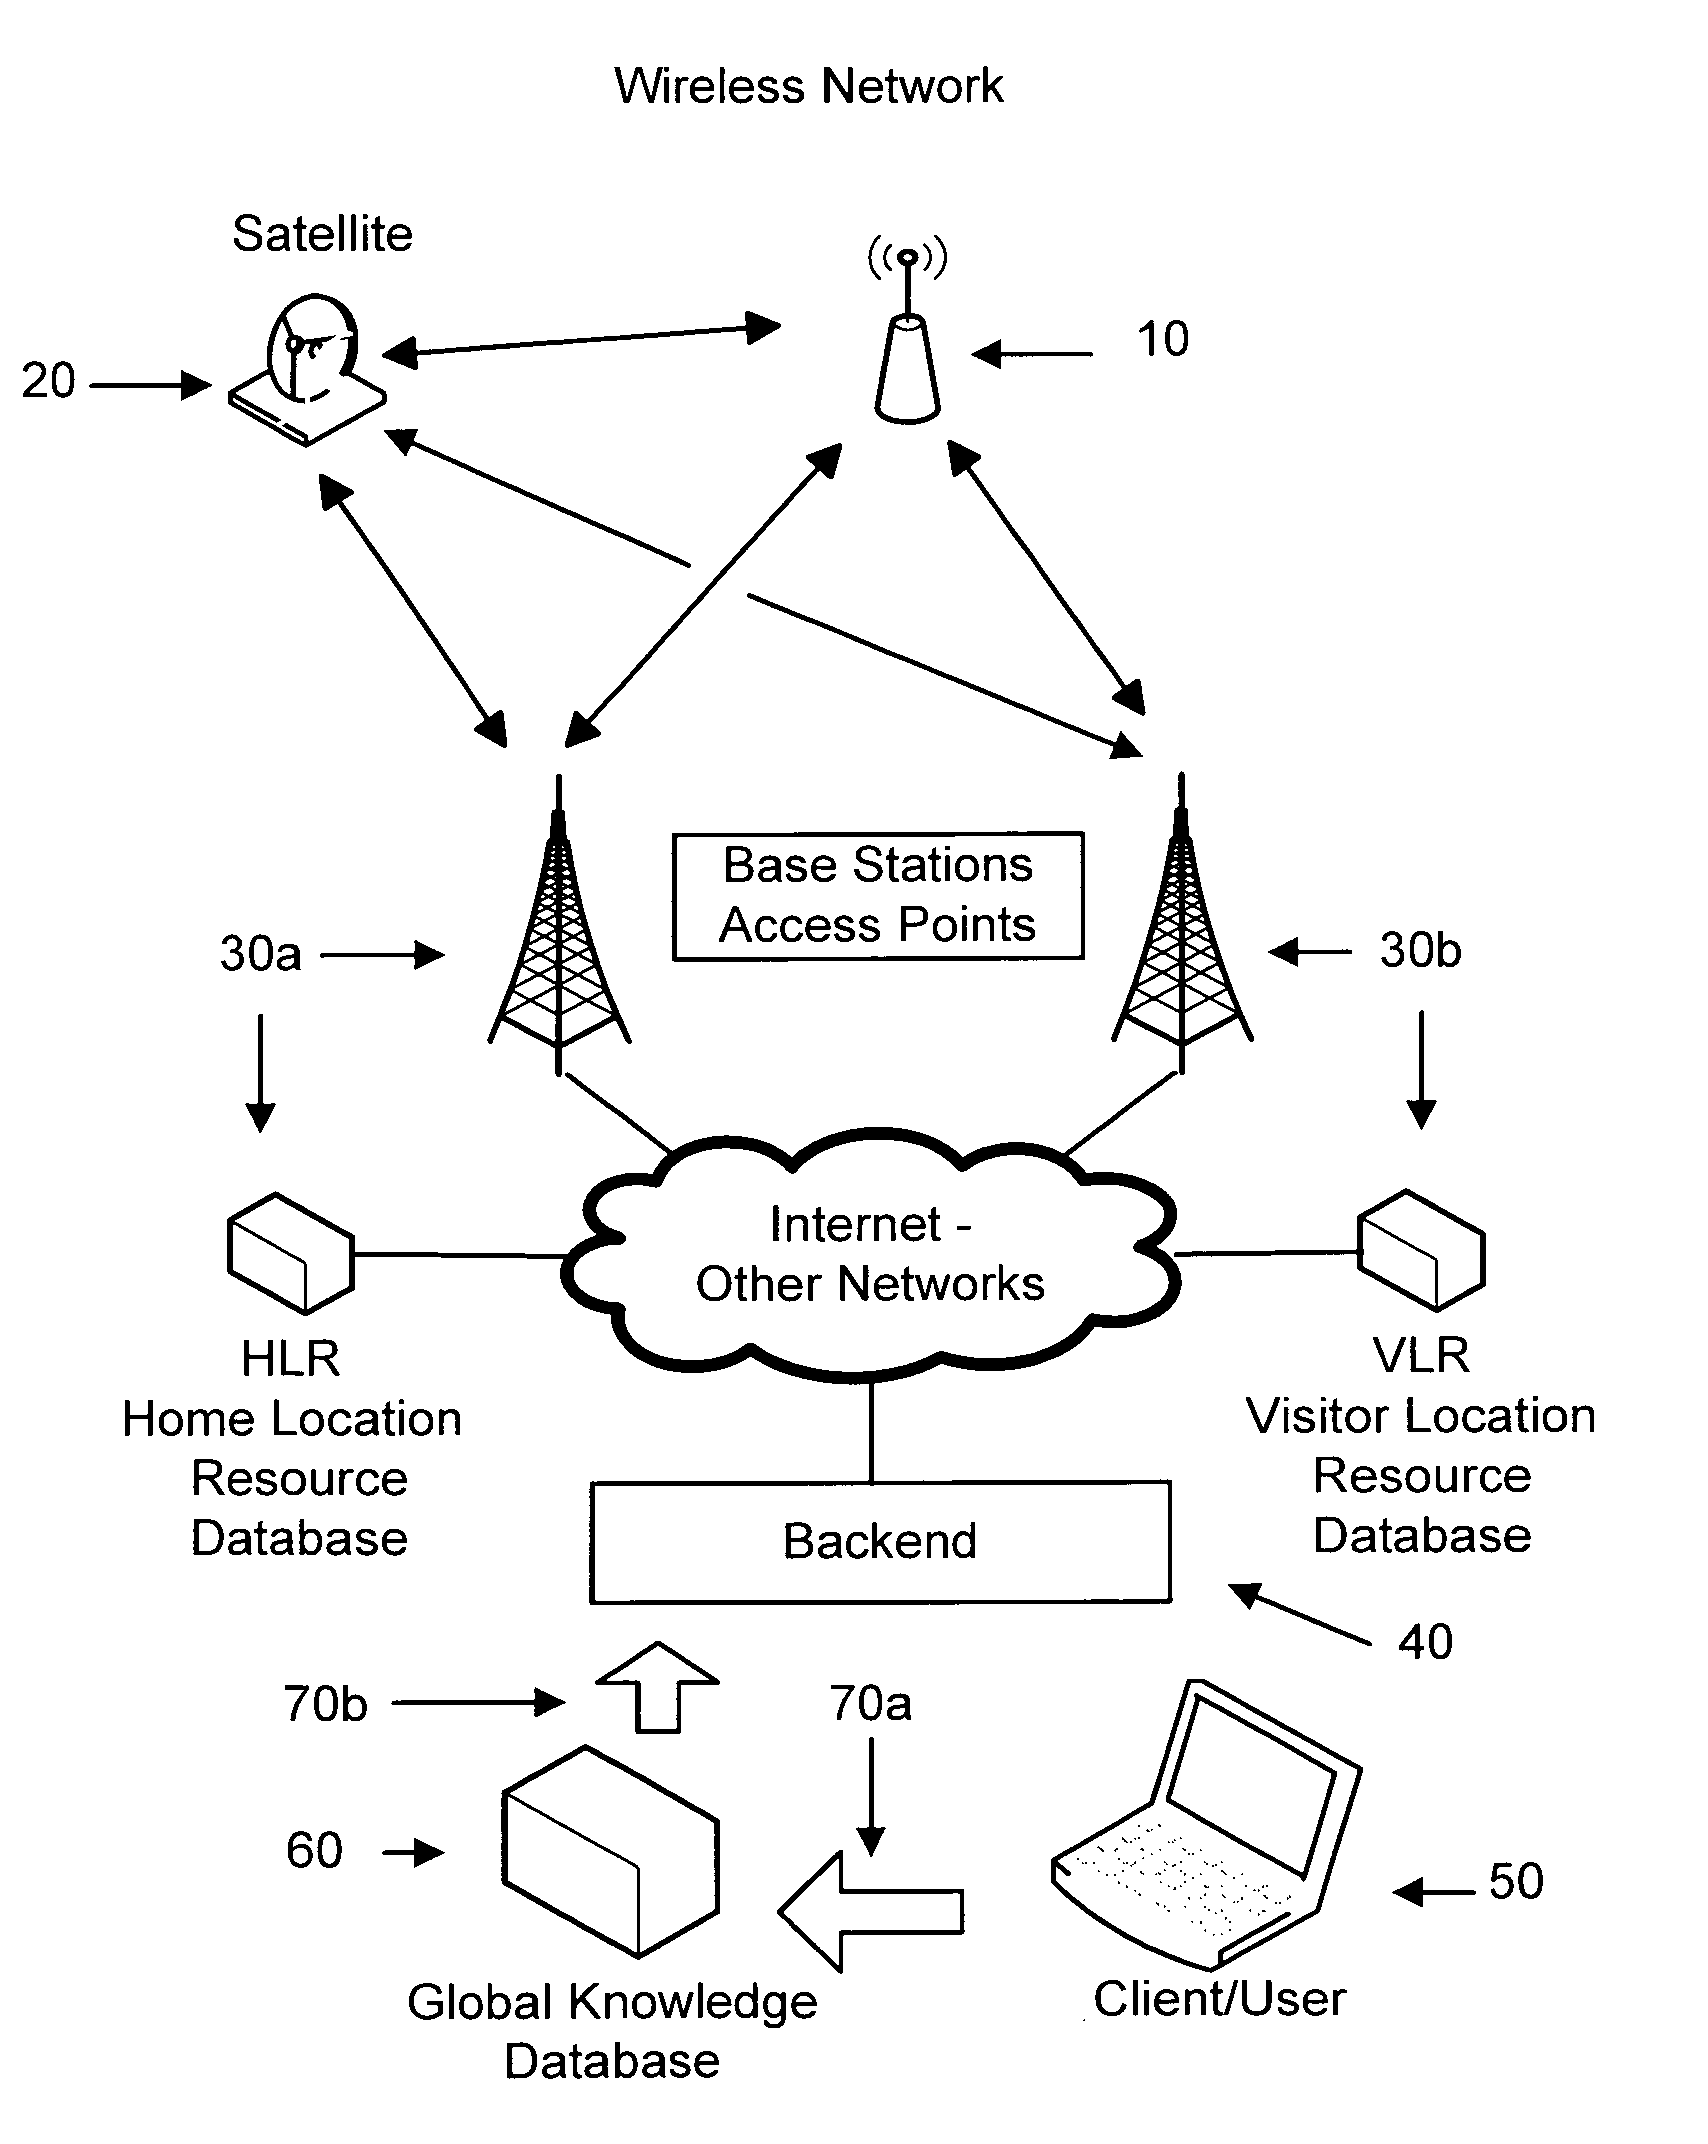 Passive mode tracking through existing and future wireless networks